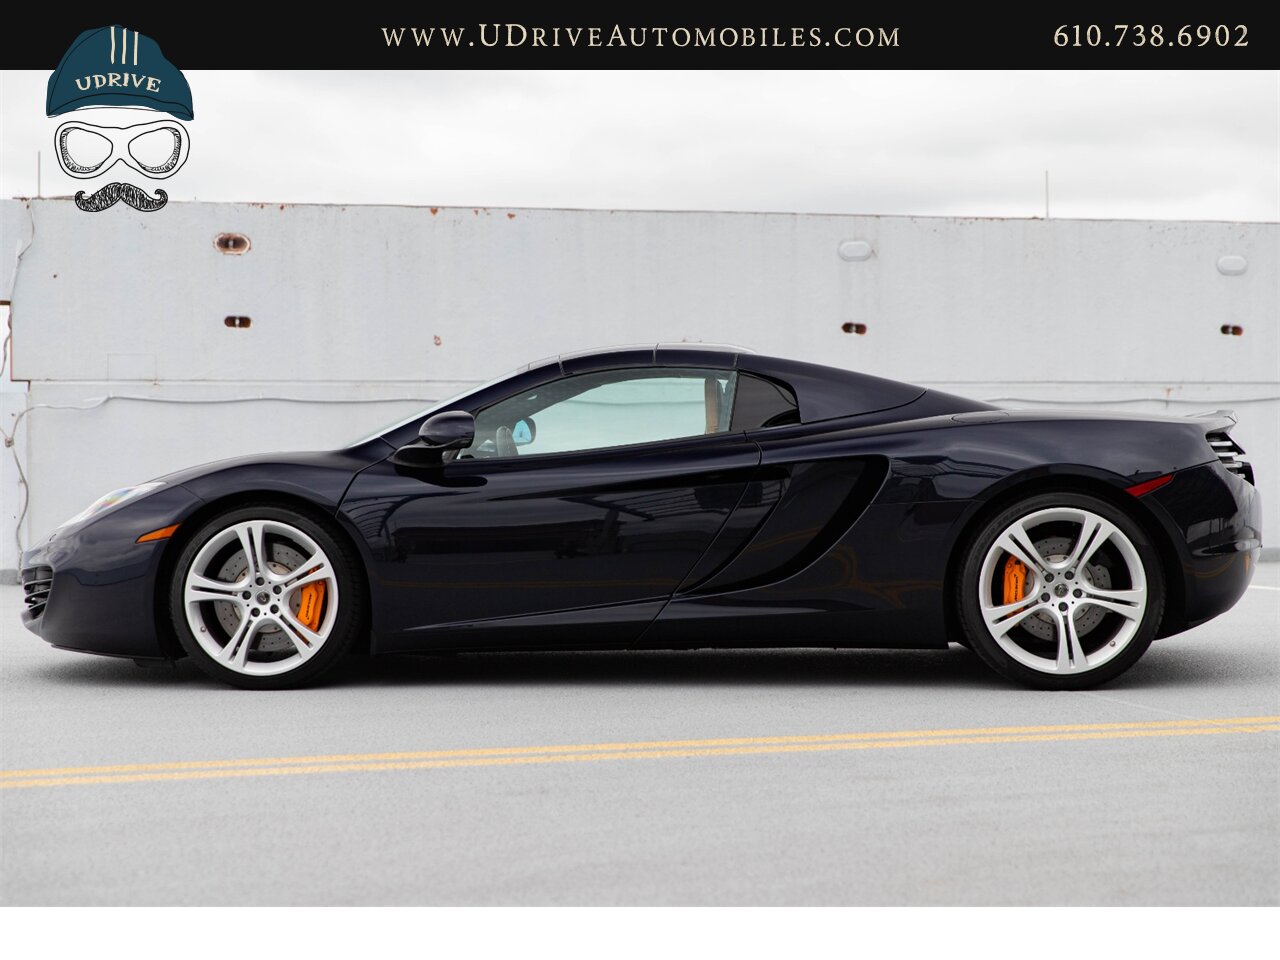 2013 McLaren MP4-12C Spider 1 Owner 6k Miles Carbon Fiber Full Leather  Sapphire Black over Natural Tan Leather - Photo 6 - West Chester, PA 19382